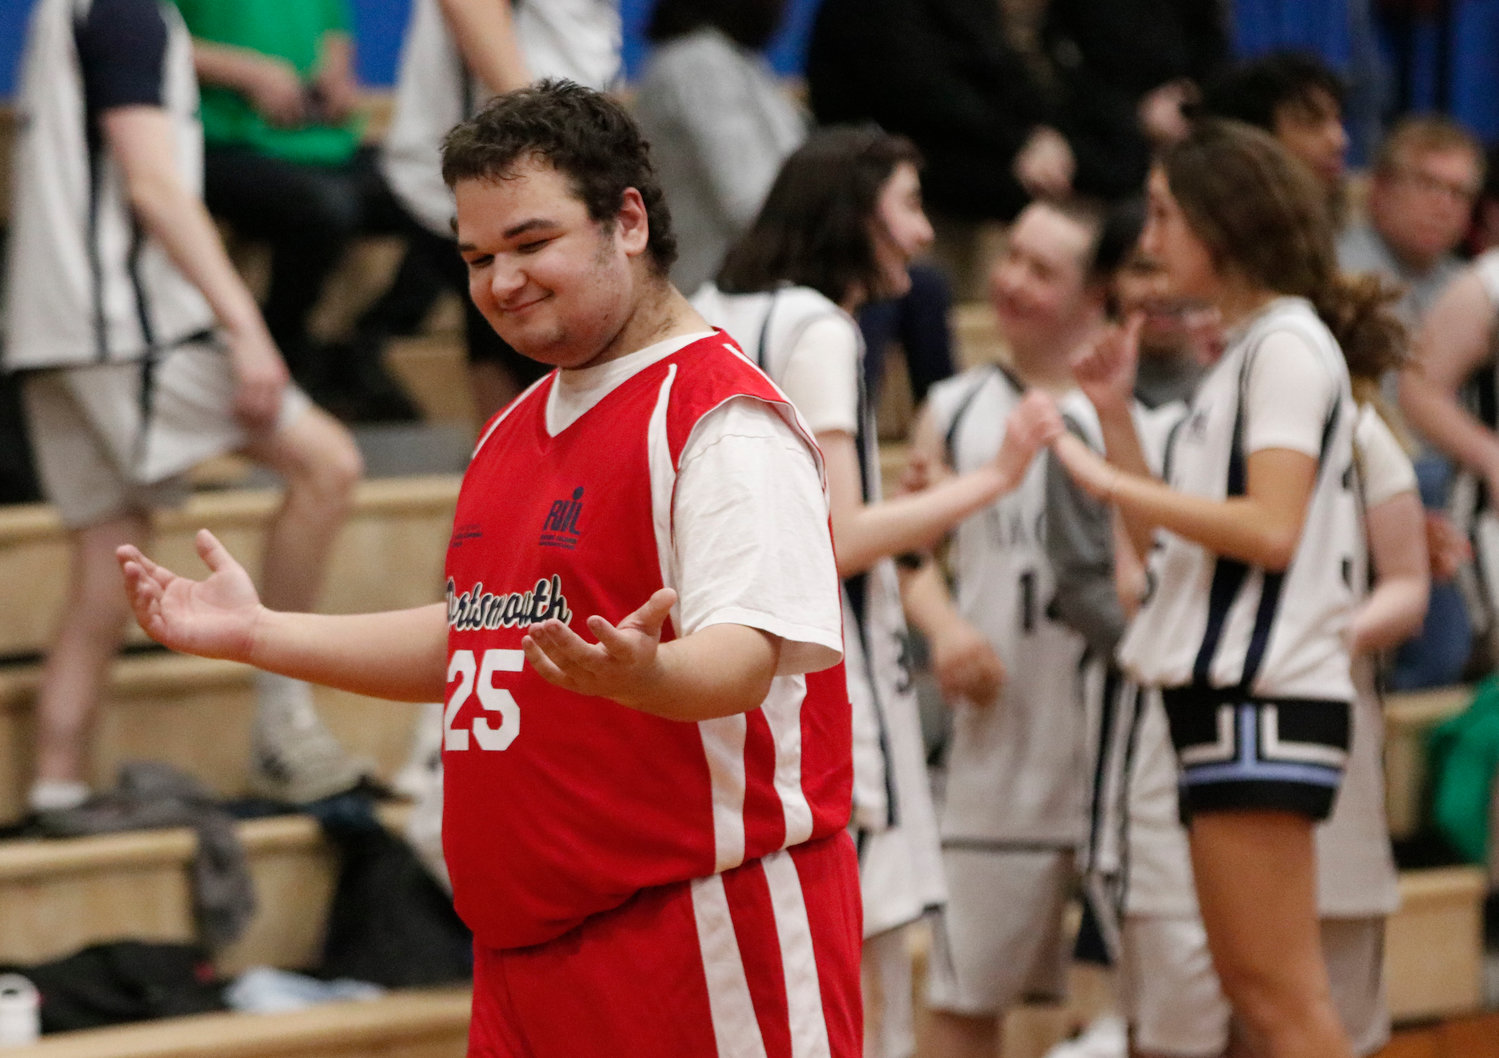 Curtis Sanders reacts after the unified team suffered a 50-48 loss to Barrington during a league game on Thursday.